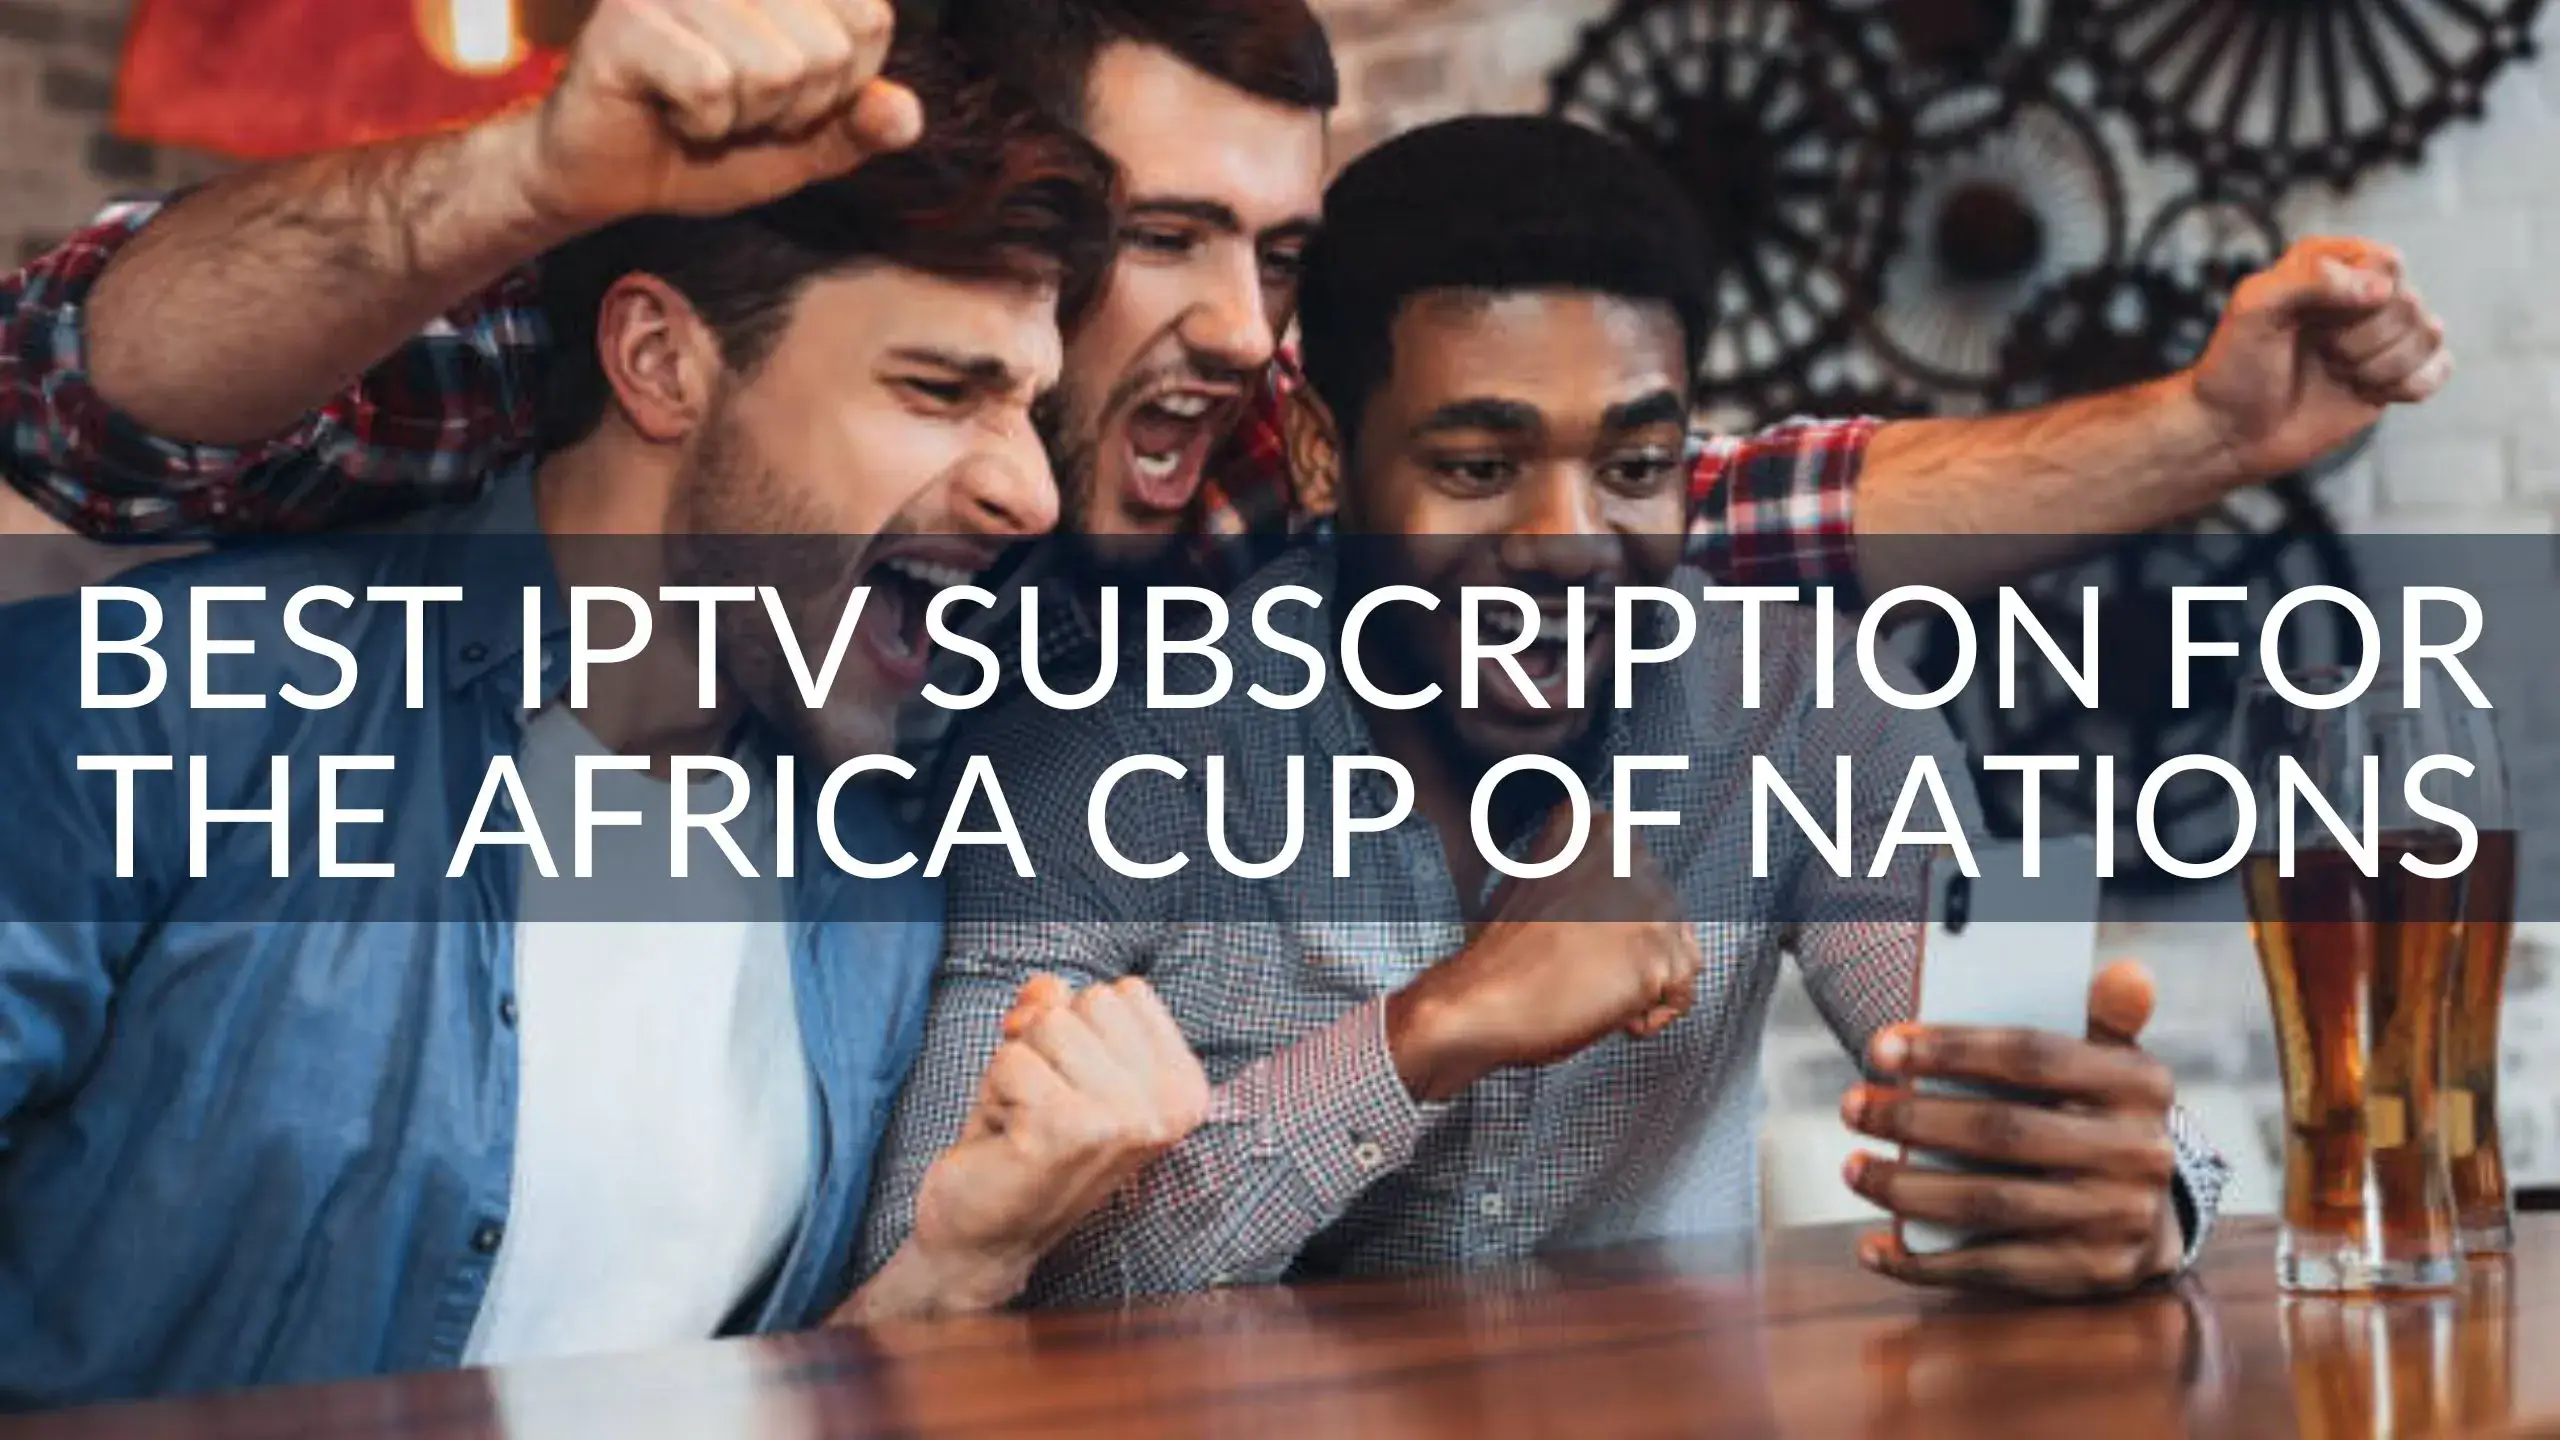 Best IPTV Subscription for the Africa Cup of Nations